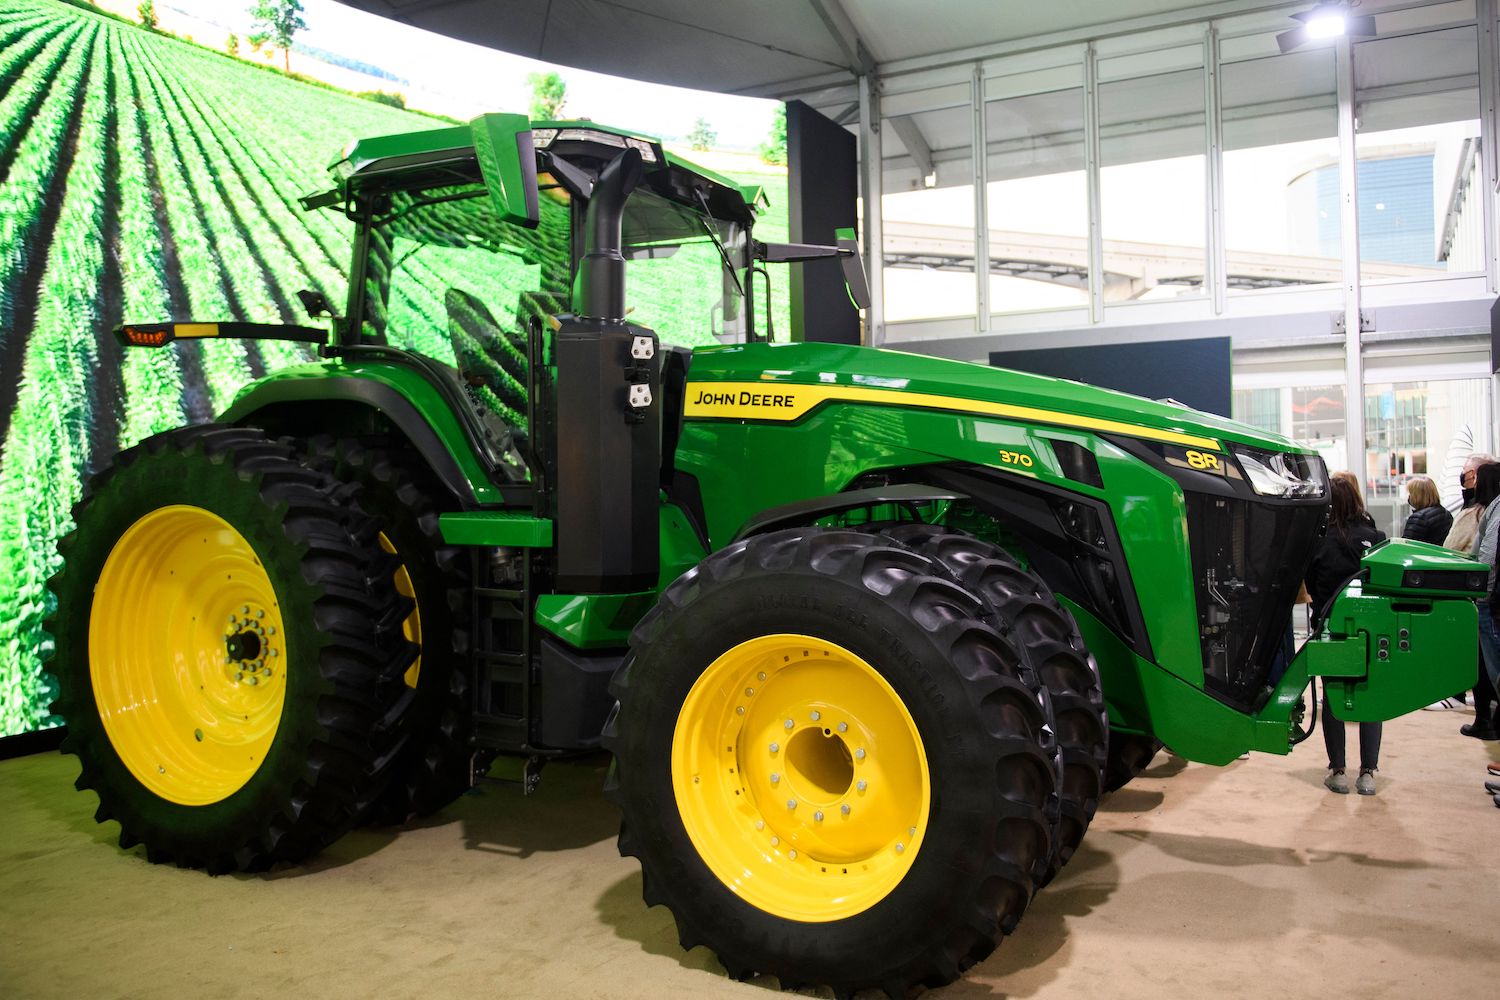 The Deer & Co. John Deere 8R fully autonomous tractor is displayed ahead of the Consumer Electronics Show (CES) on January 4, 2022 in Las Vegas, Nevada. March 2022